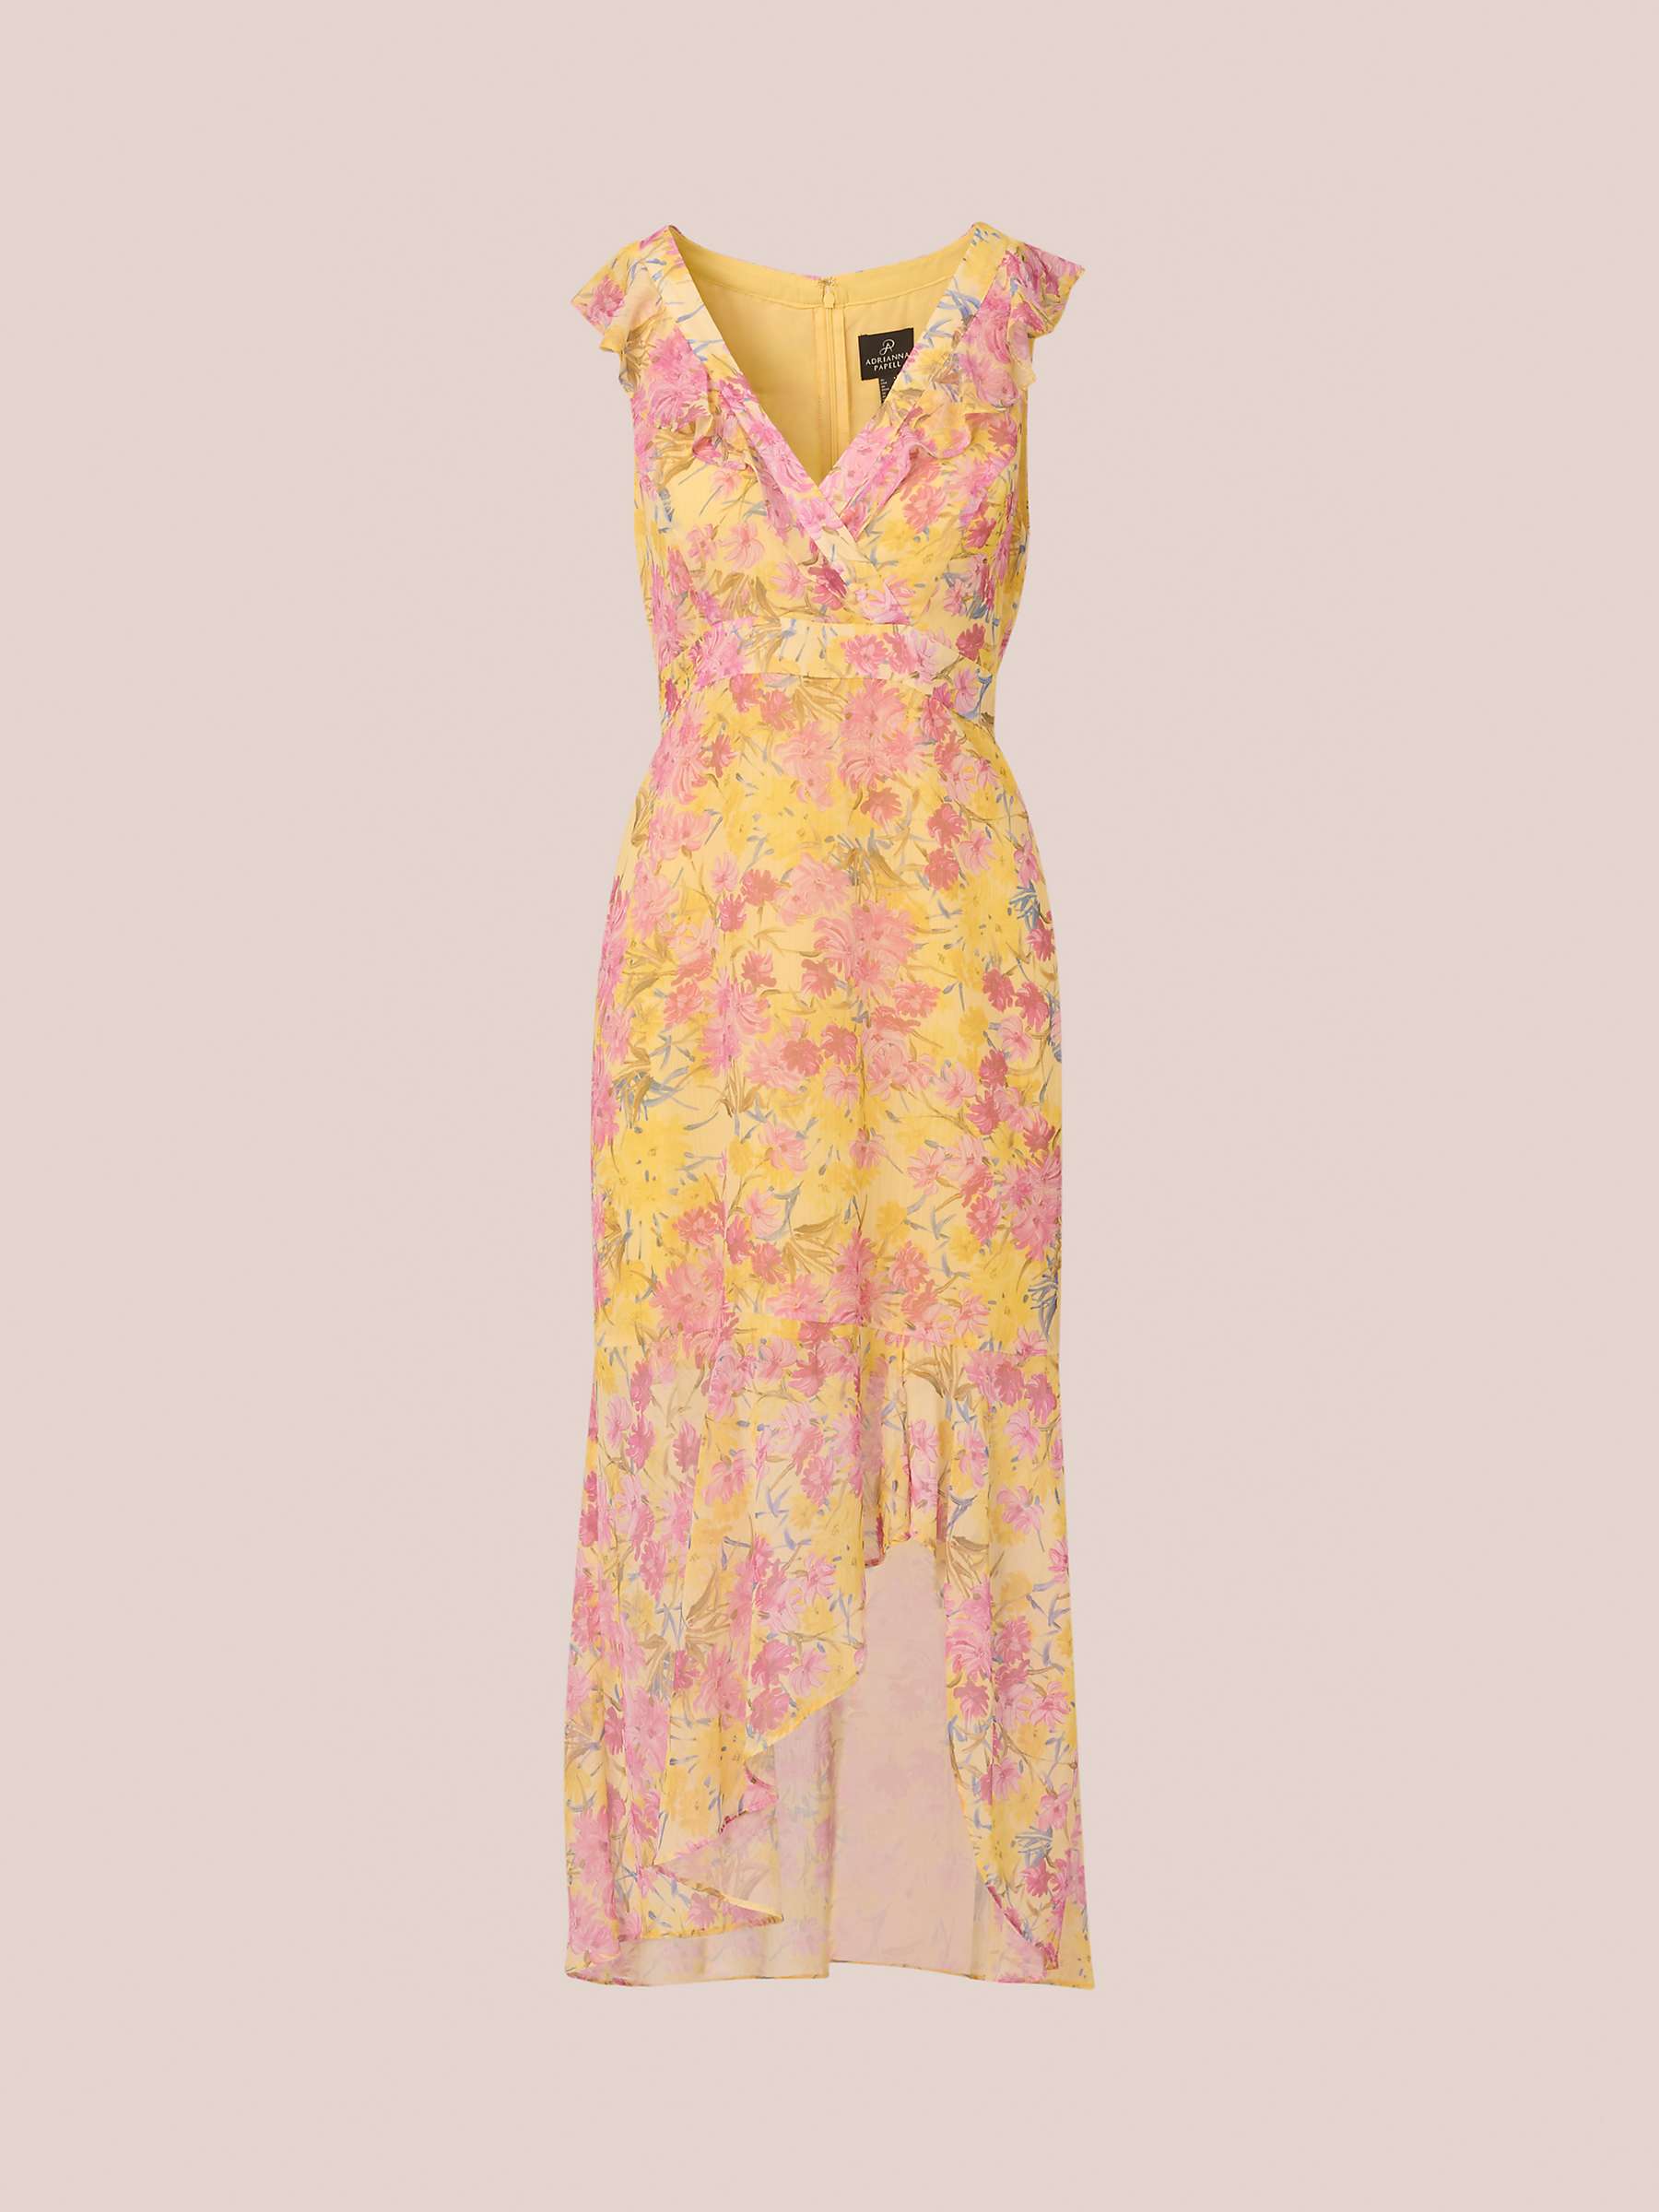 Buy Adrianna Papell Floral Print Ruffle Detail Maxi Dress, Yellow/Multi Online at johnlewis.com